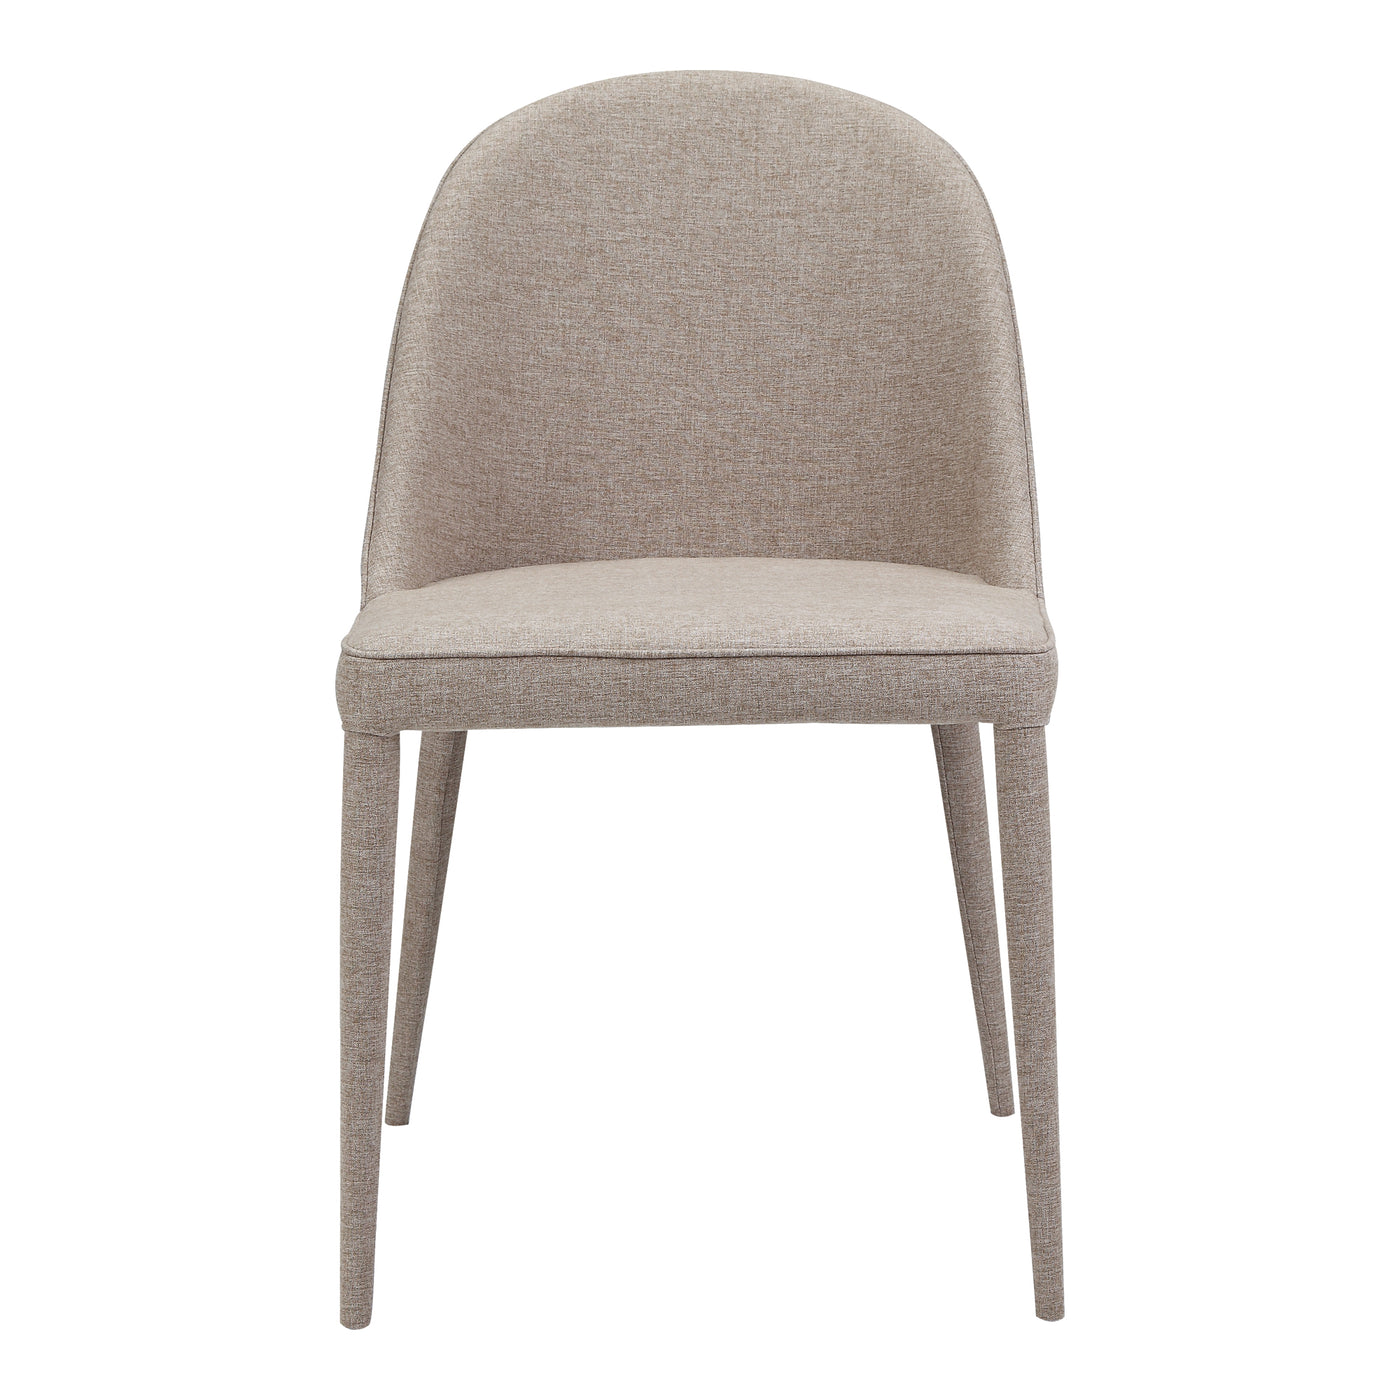 Drawing from a contemporary modern design, the Burton dining chair is outfitted with a two-toned pattern. It features a ro...